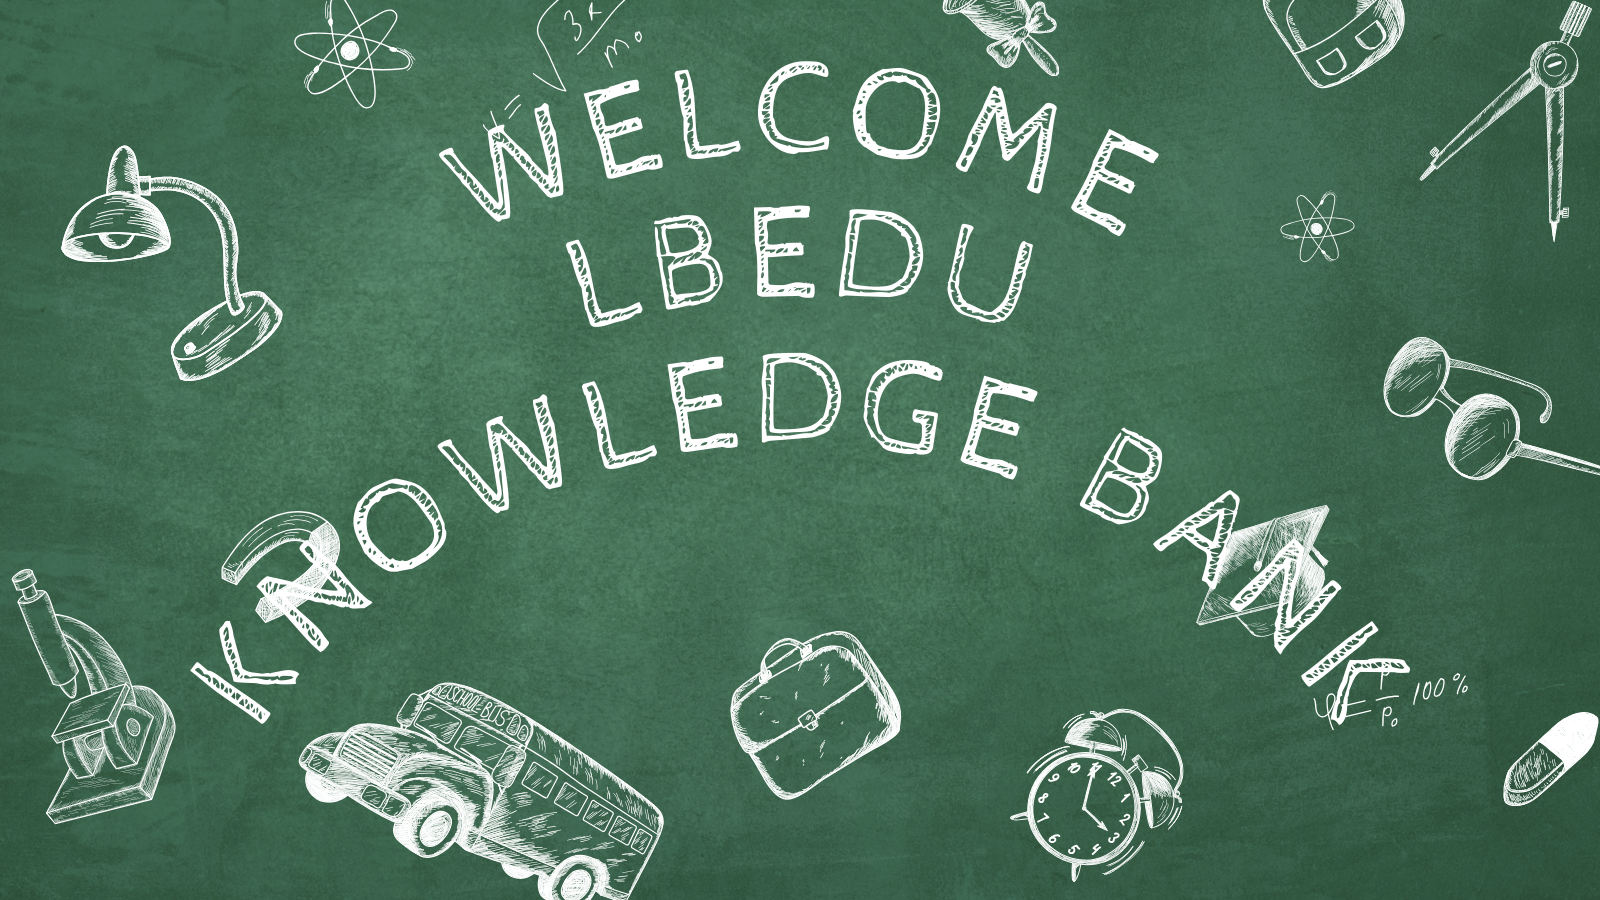 Welcome to LBEDU Knowledge Bank - Come and Learn...